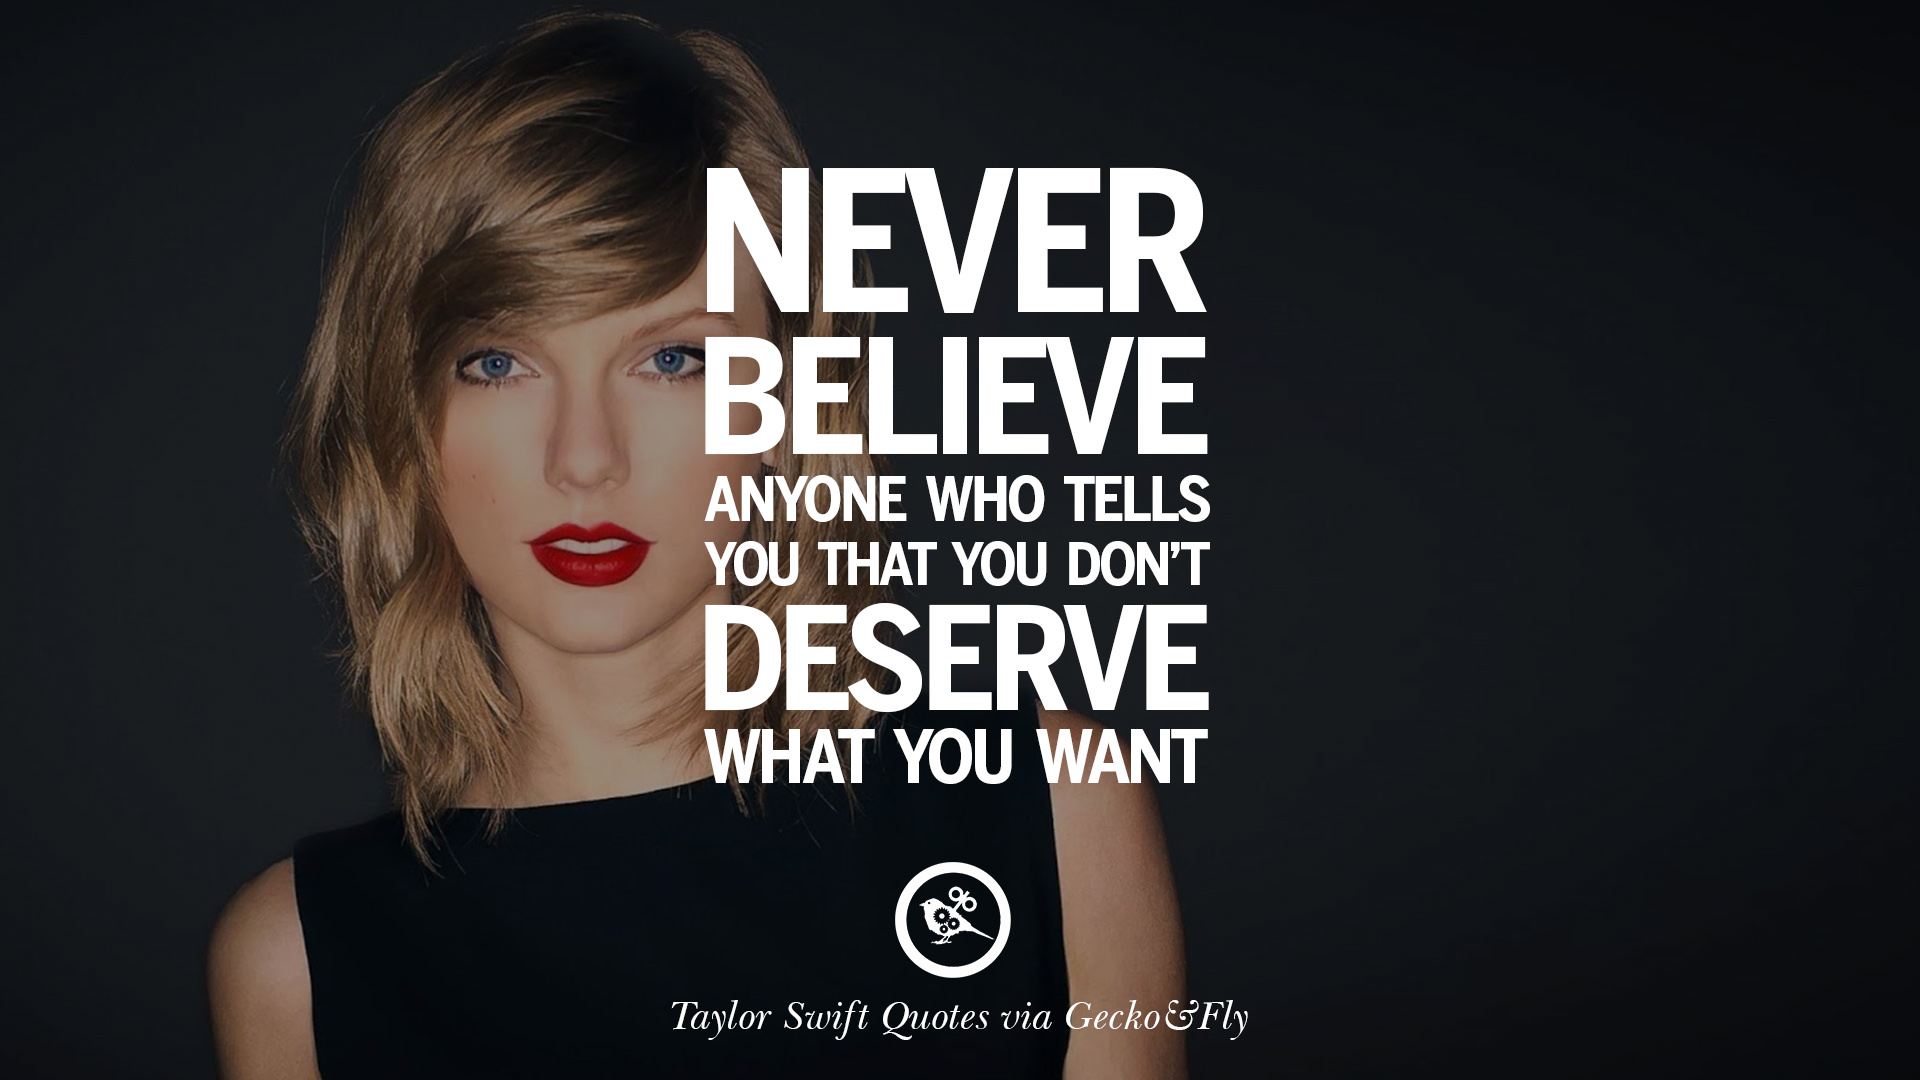 10 Best Taylor Swift Quotes